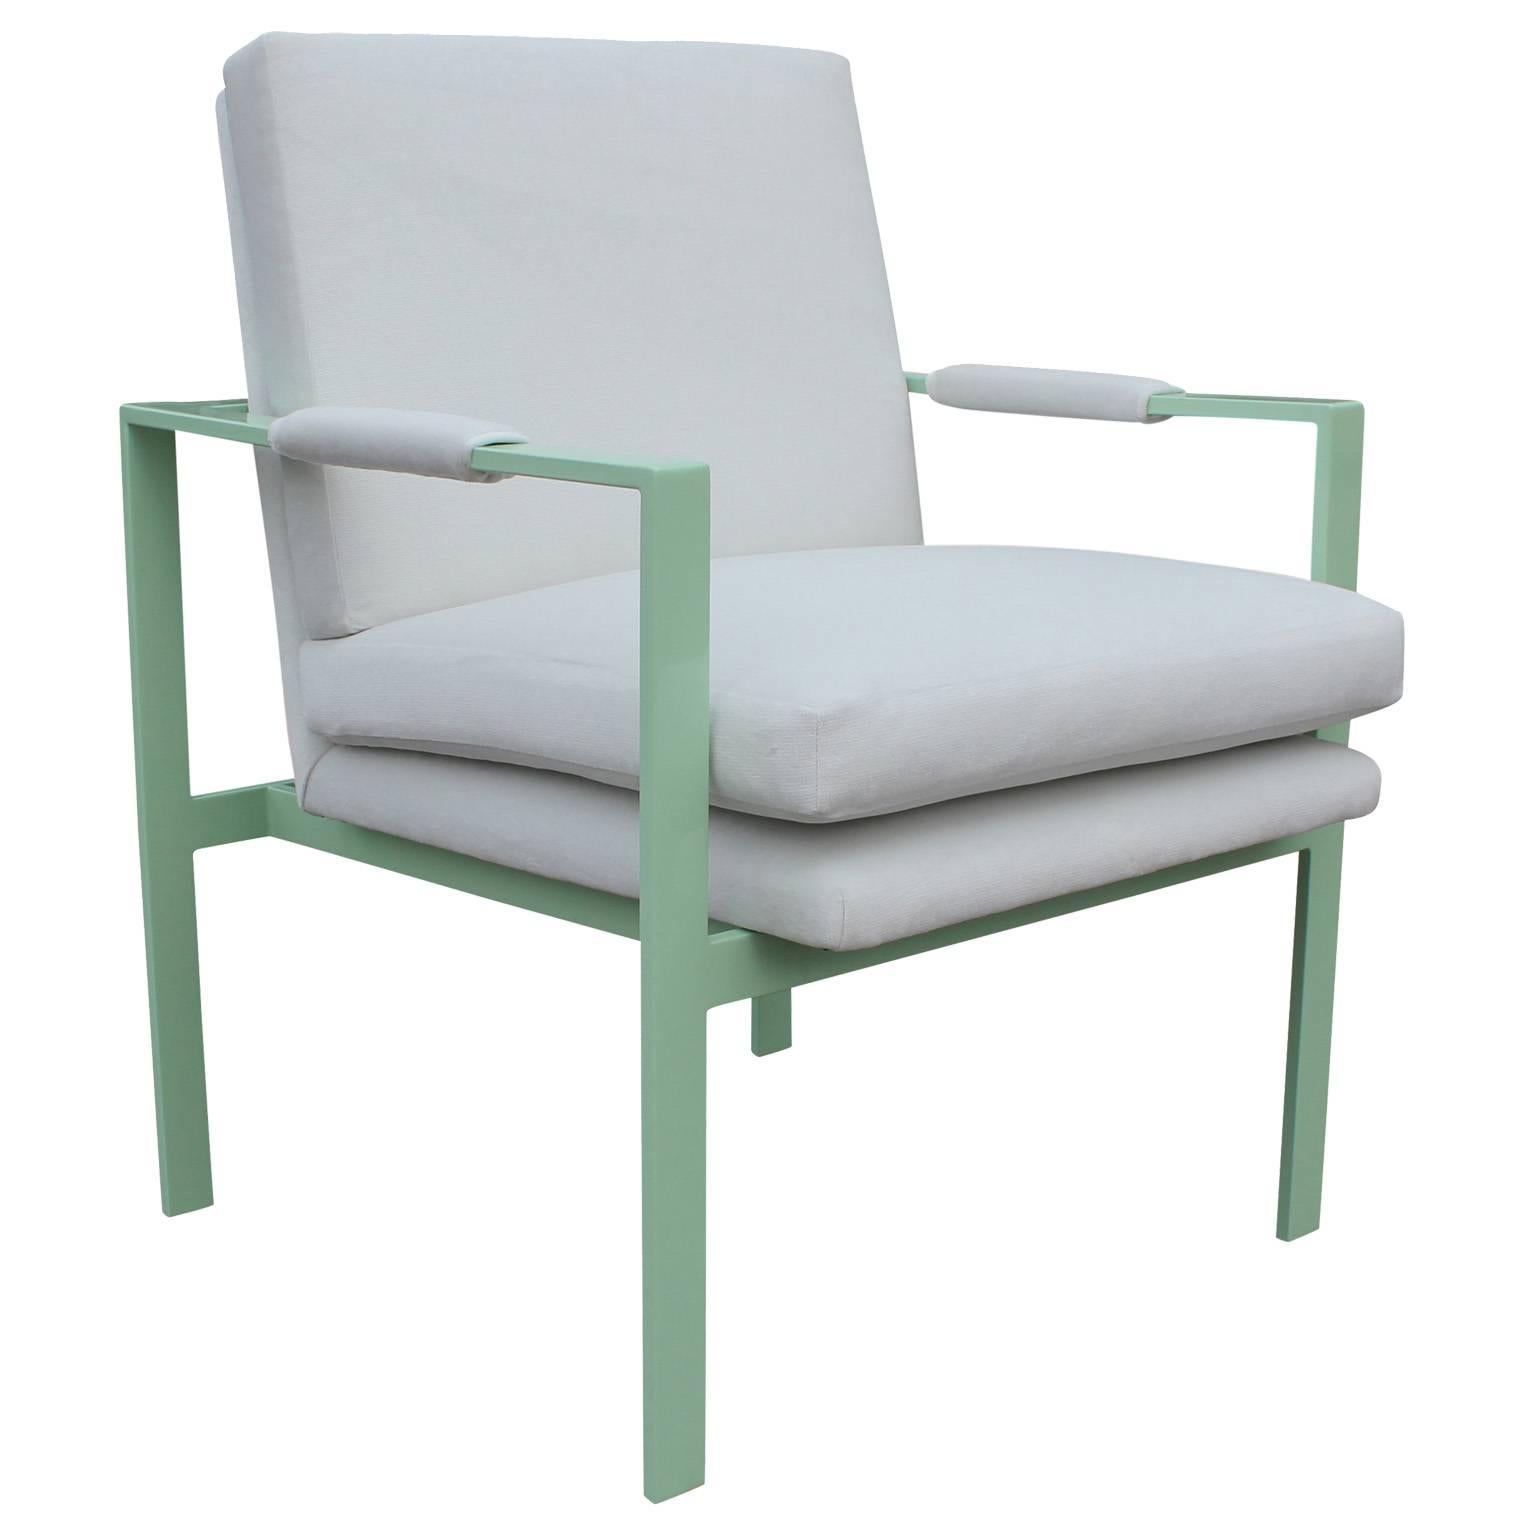 Late 20th Century Incredible Pair of Mint Green and White Velvet Lounge Chairs